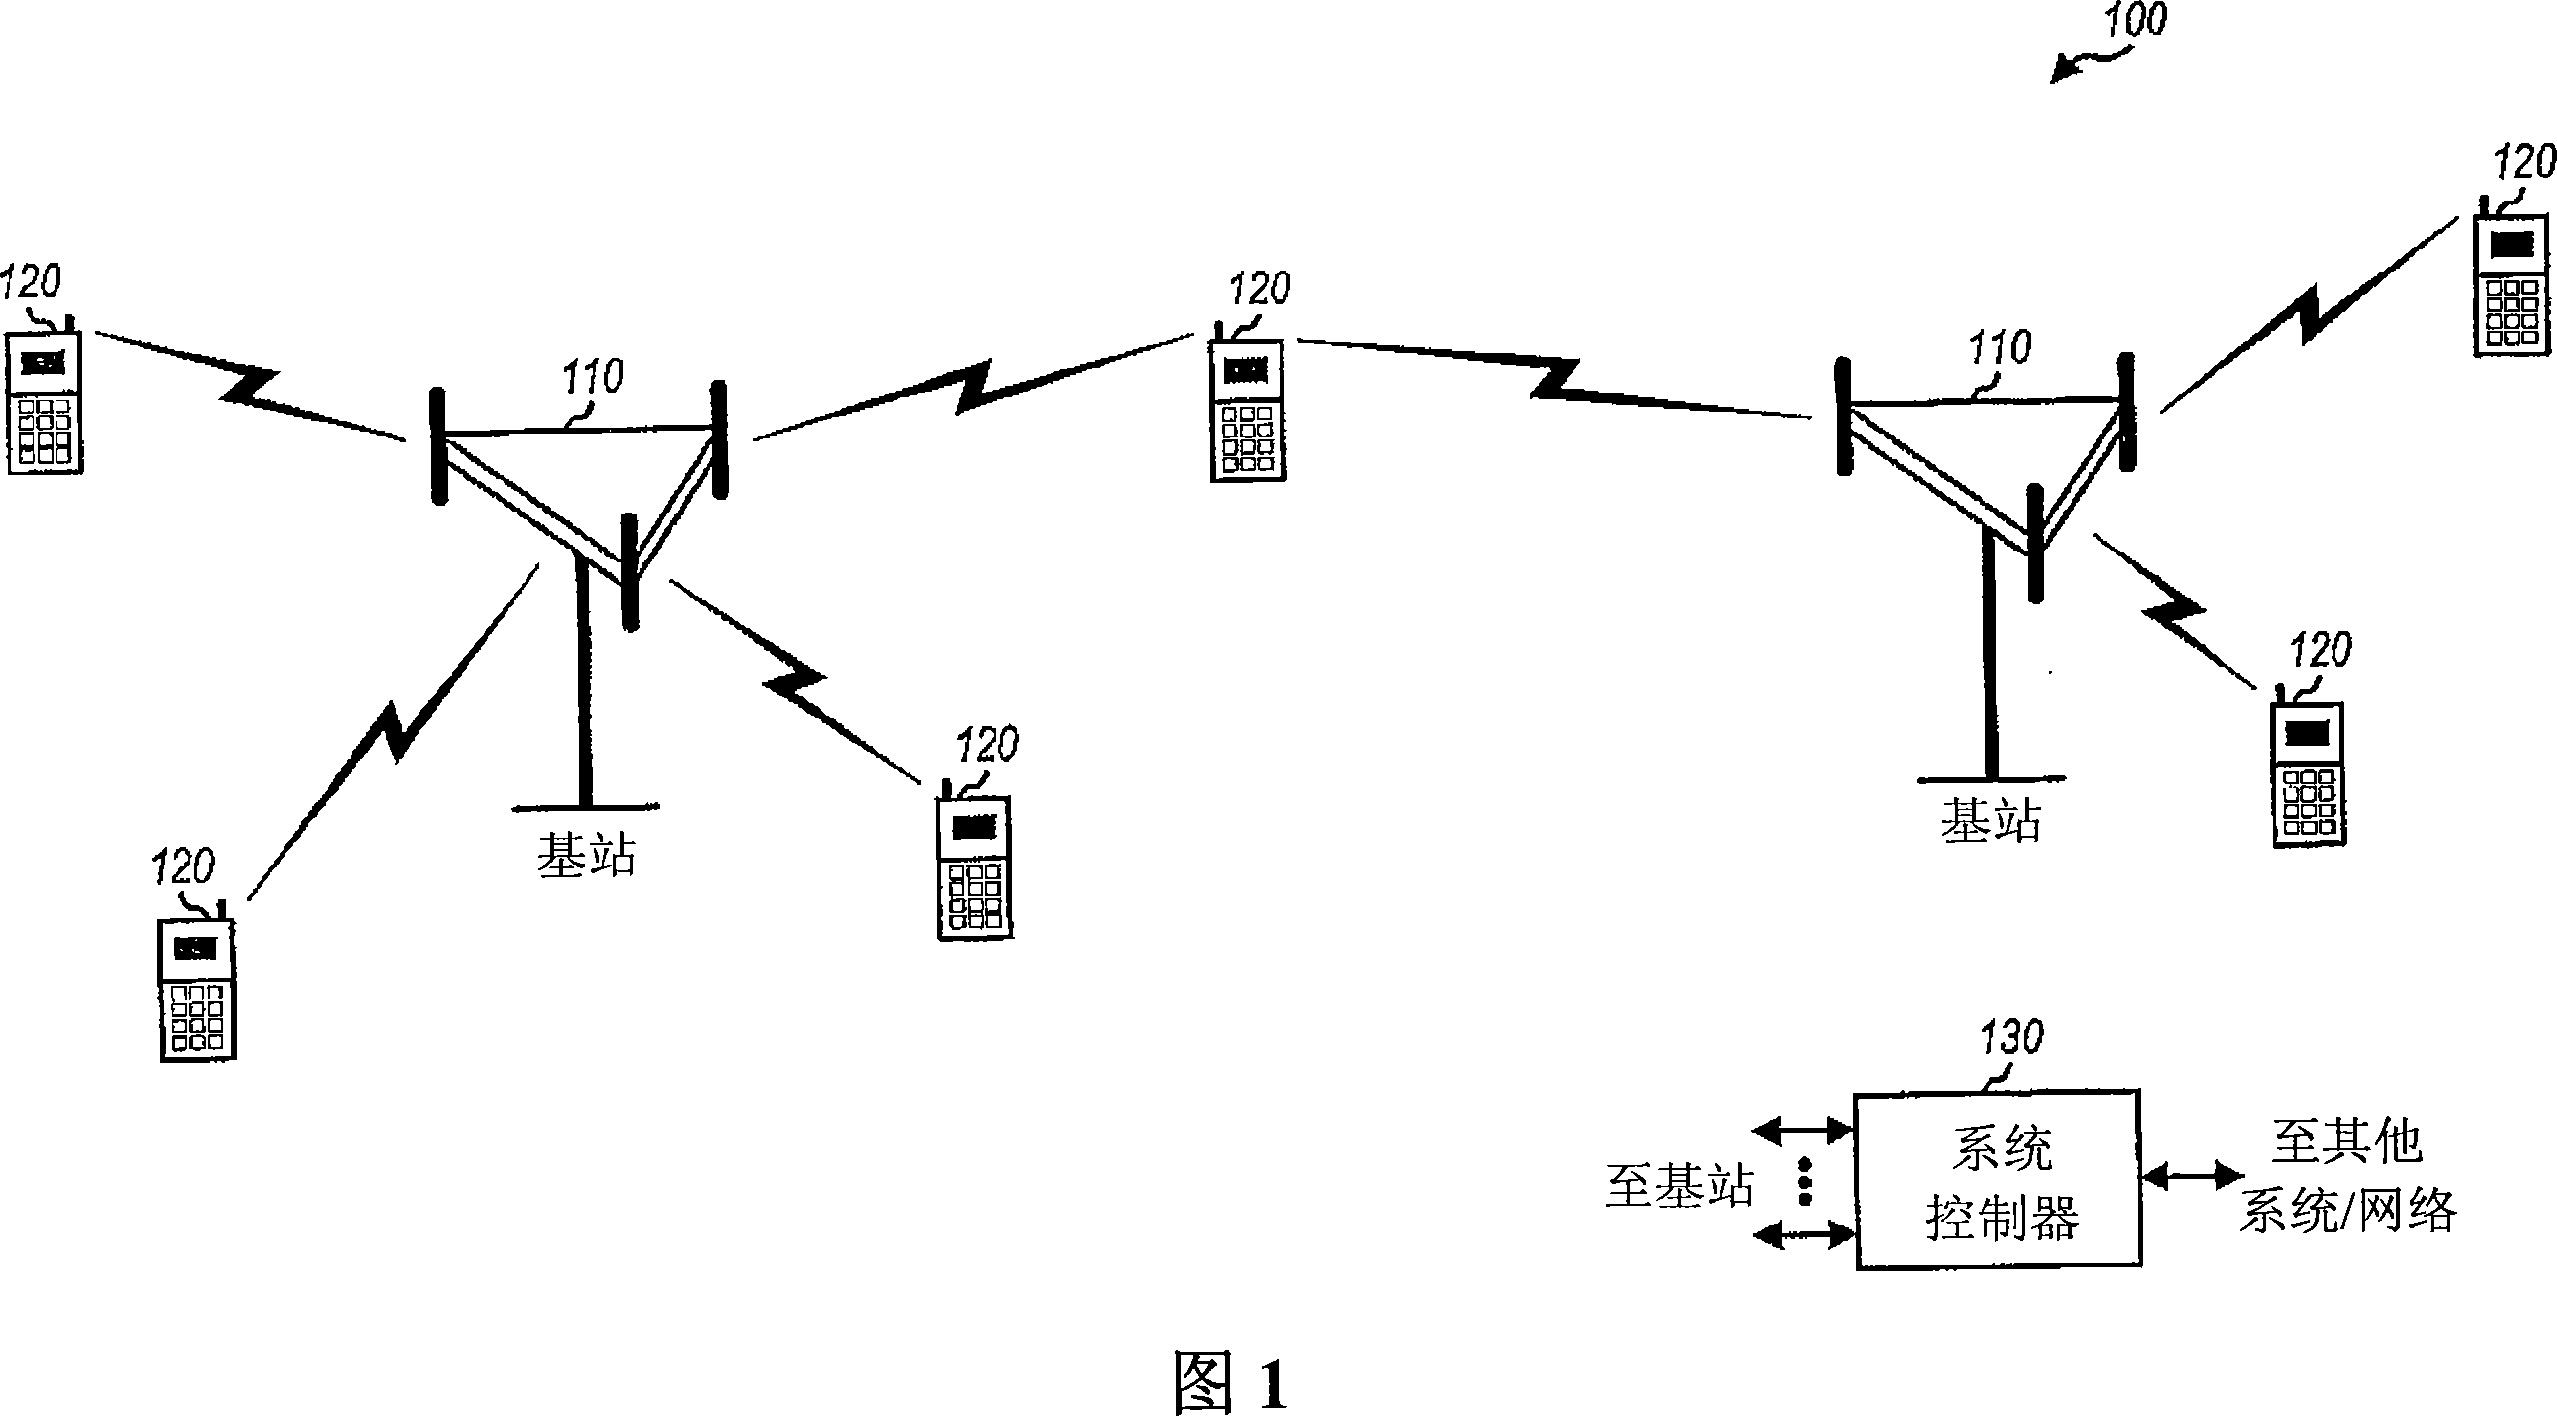 Erasure detection for a transport channel with an unknown format